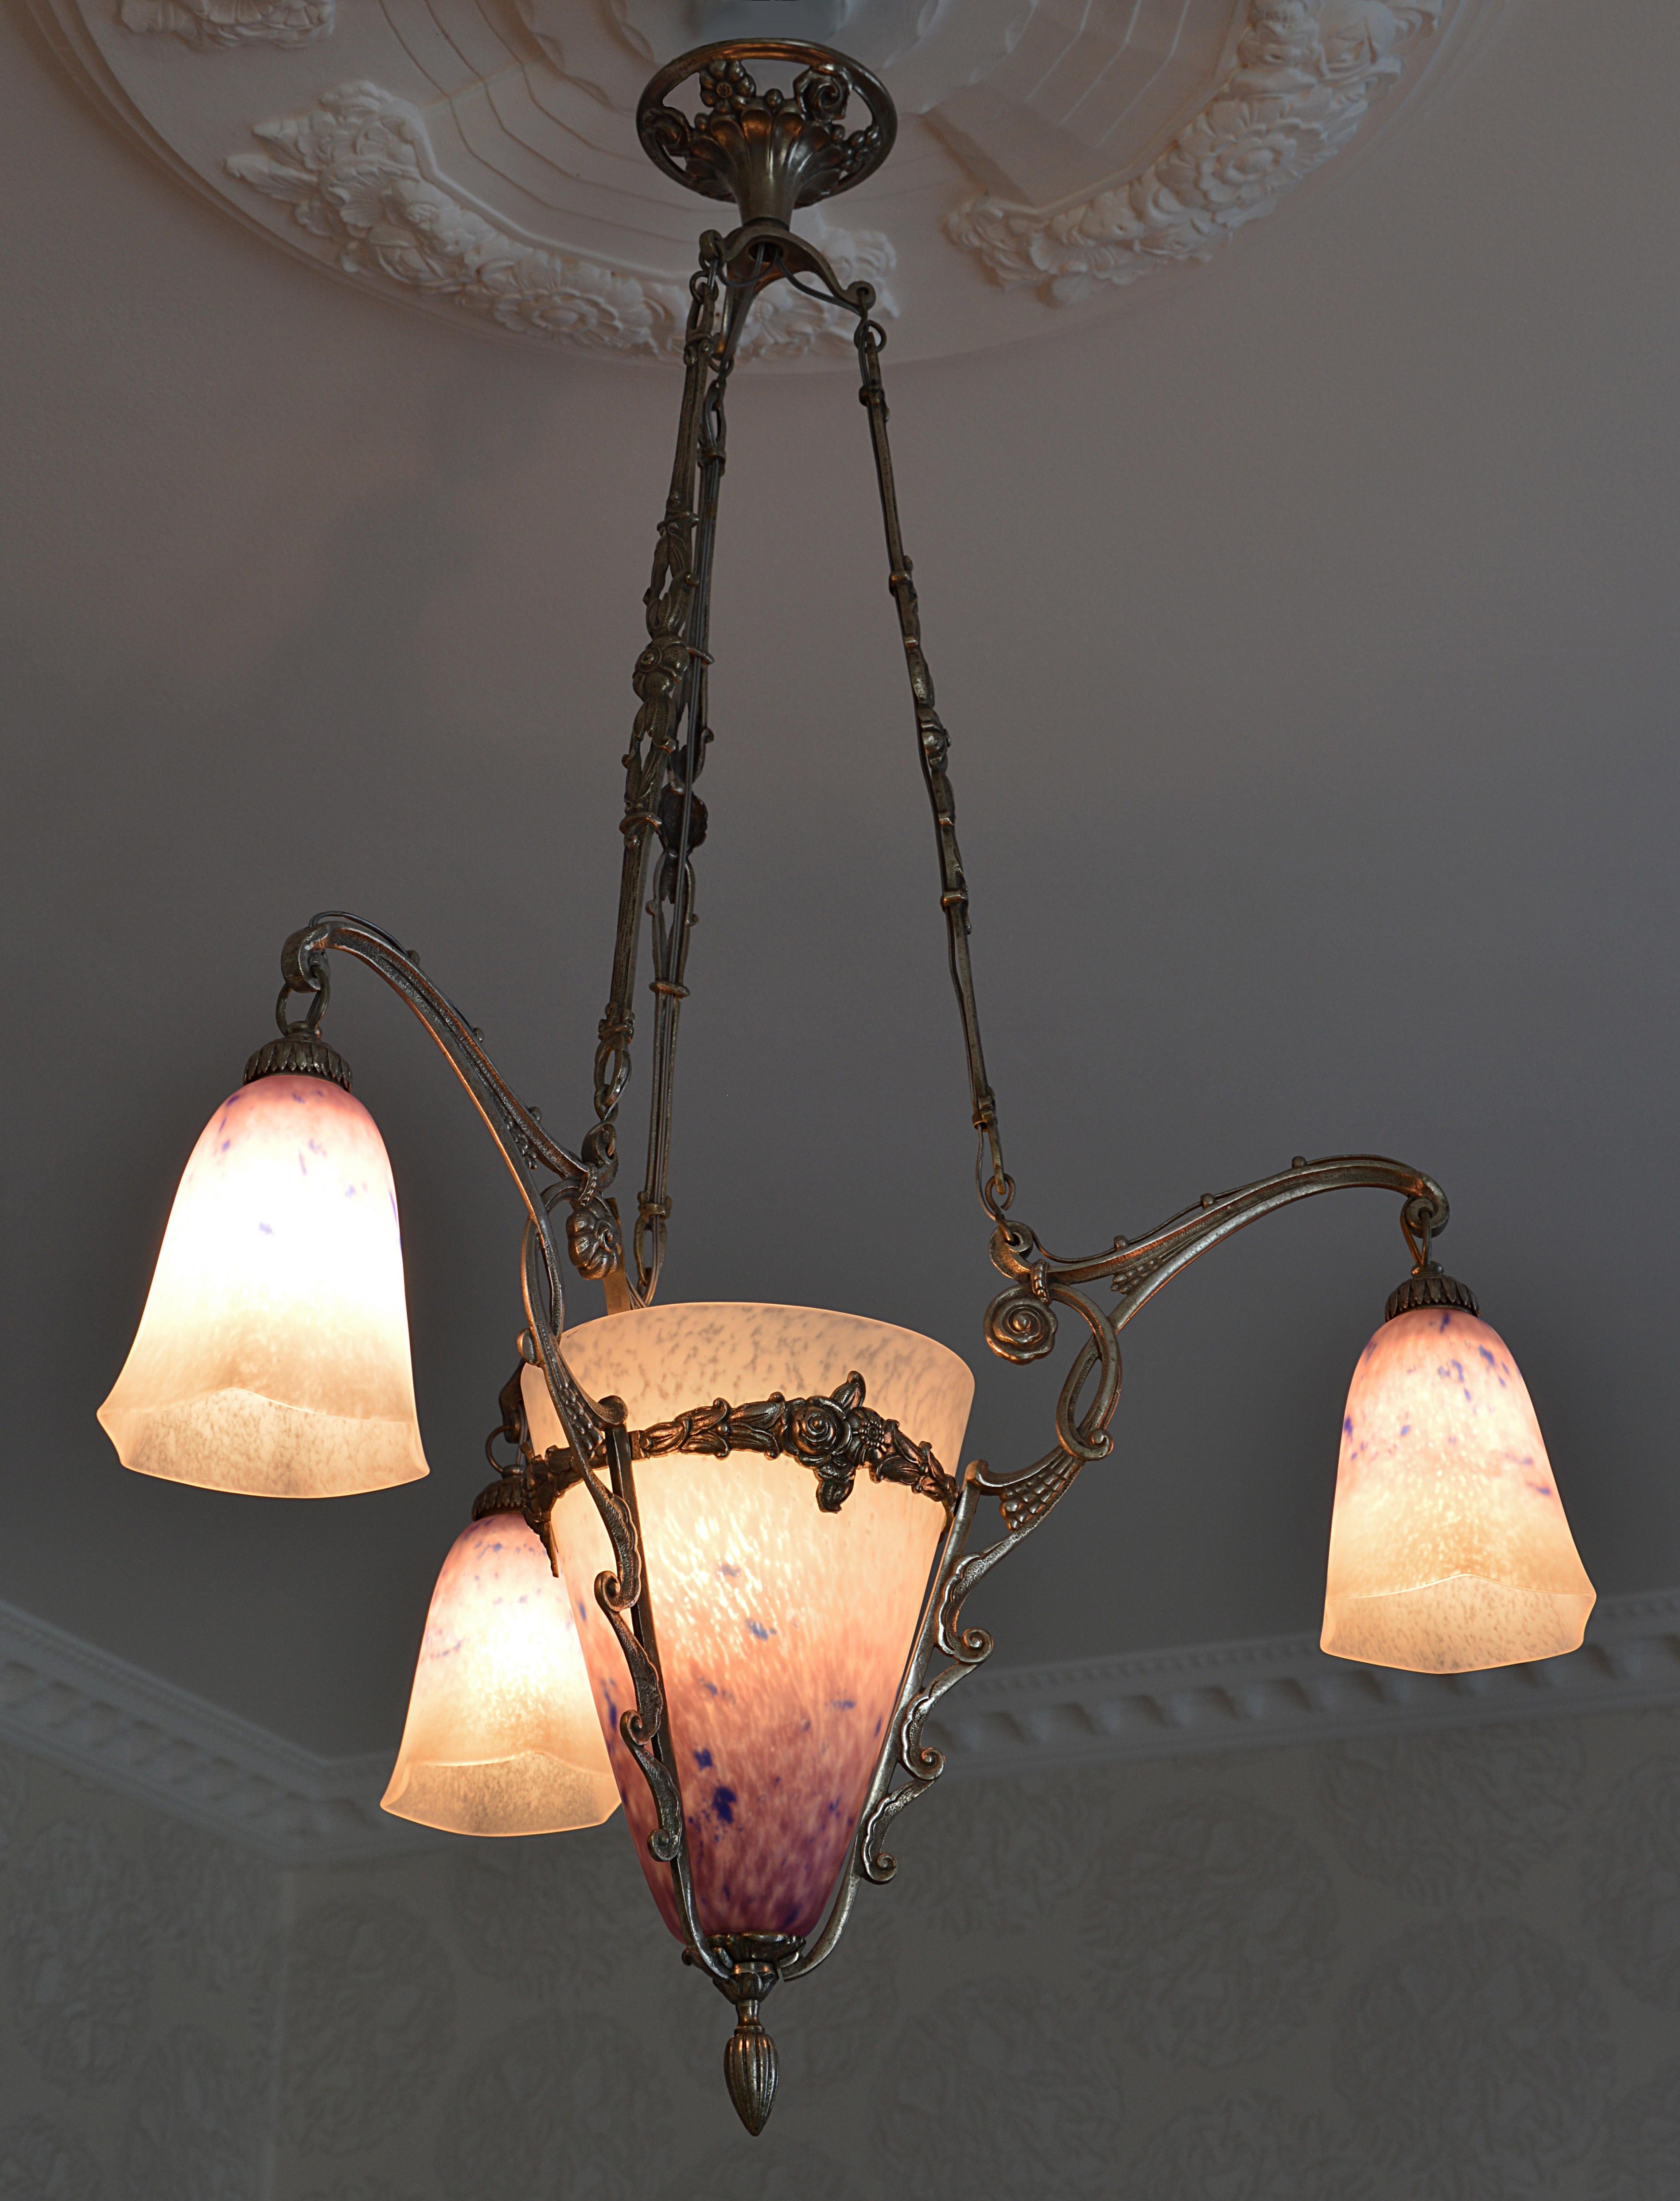 Any fair offer will be examined with the utmost attention, please send a message. French Art Deco chandelier by Charles Schneider, Epinay-sur-Seine (Paris), 1924-1928. Mottled glass shades, powders are applied between two layers that comes hung at